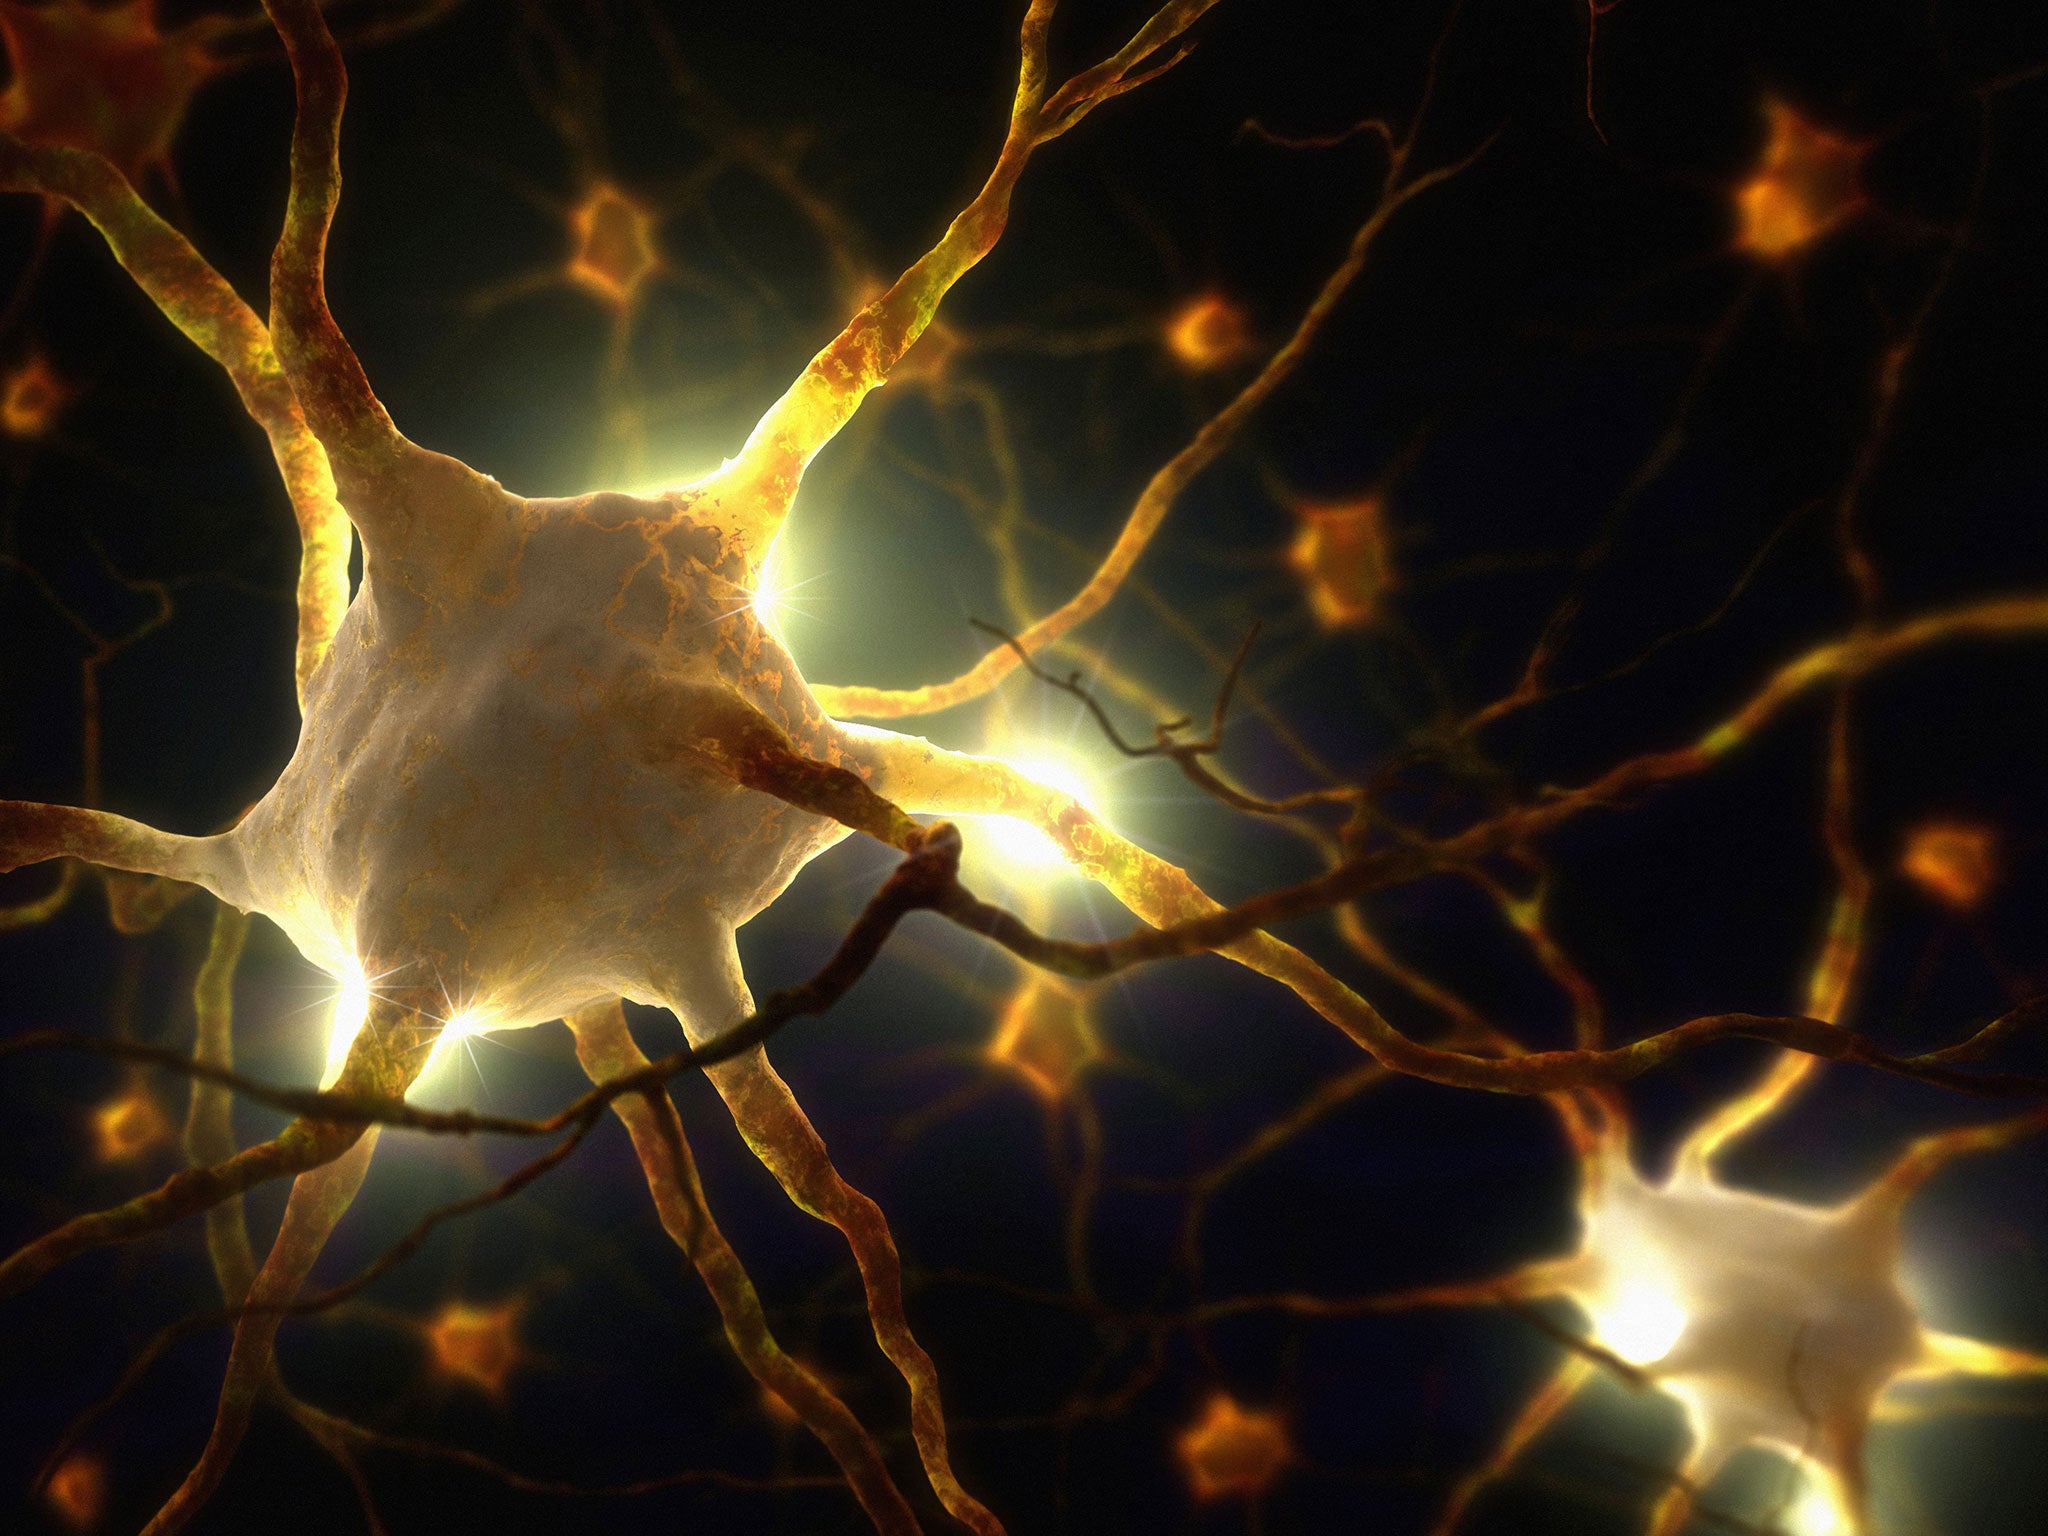 'Pain in a dish': Scientists create living model of human nerve cells